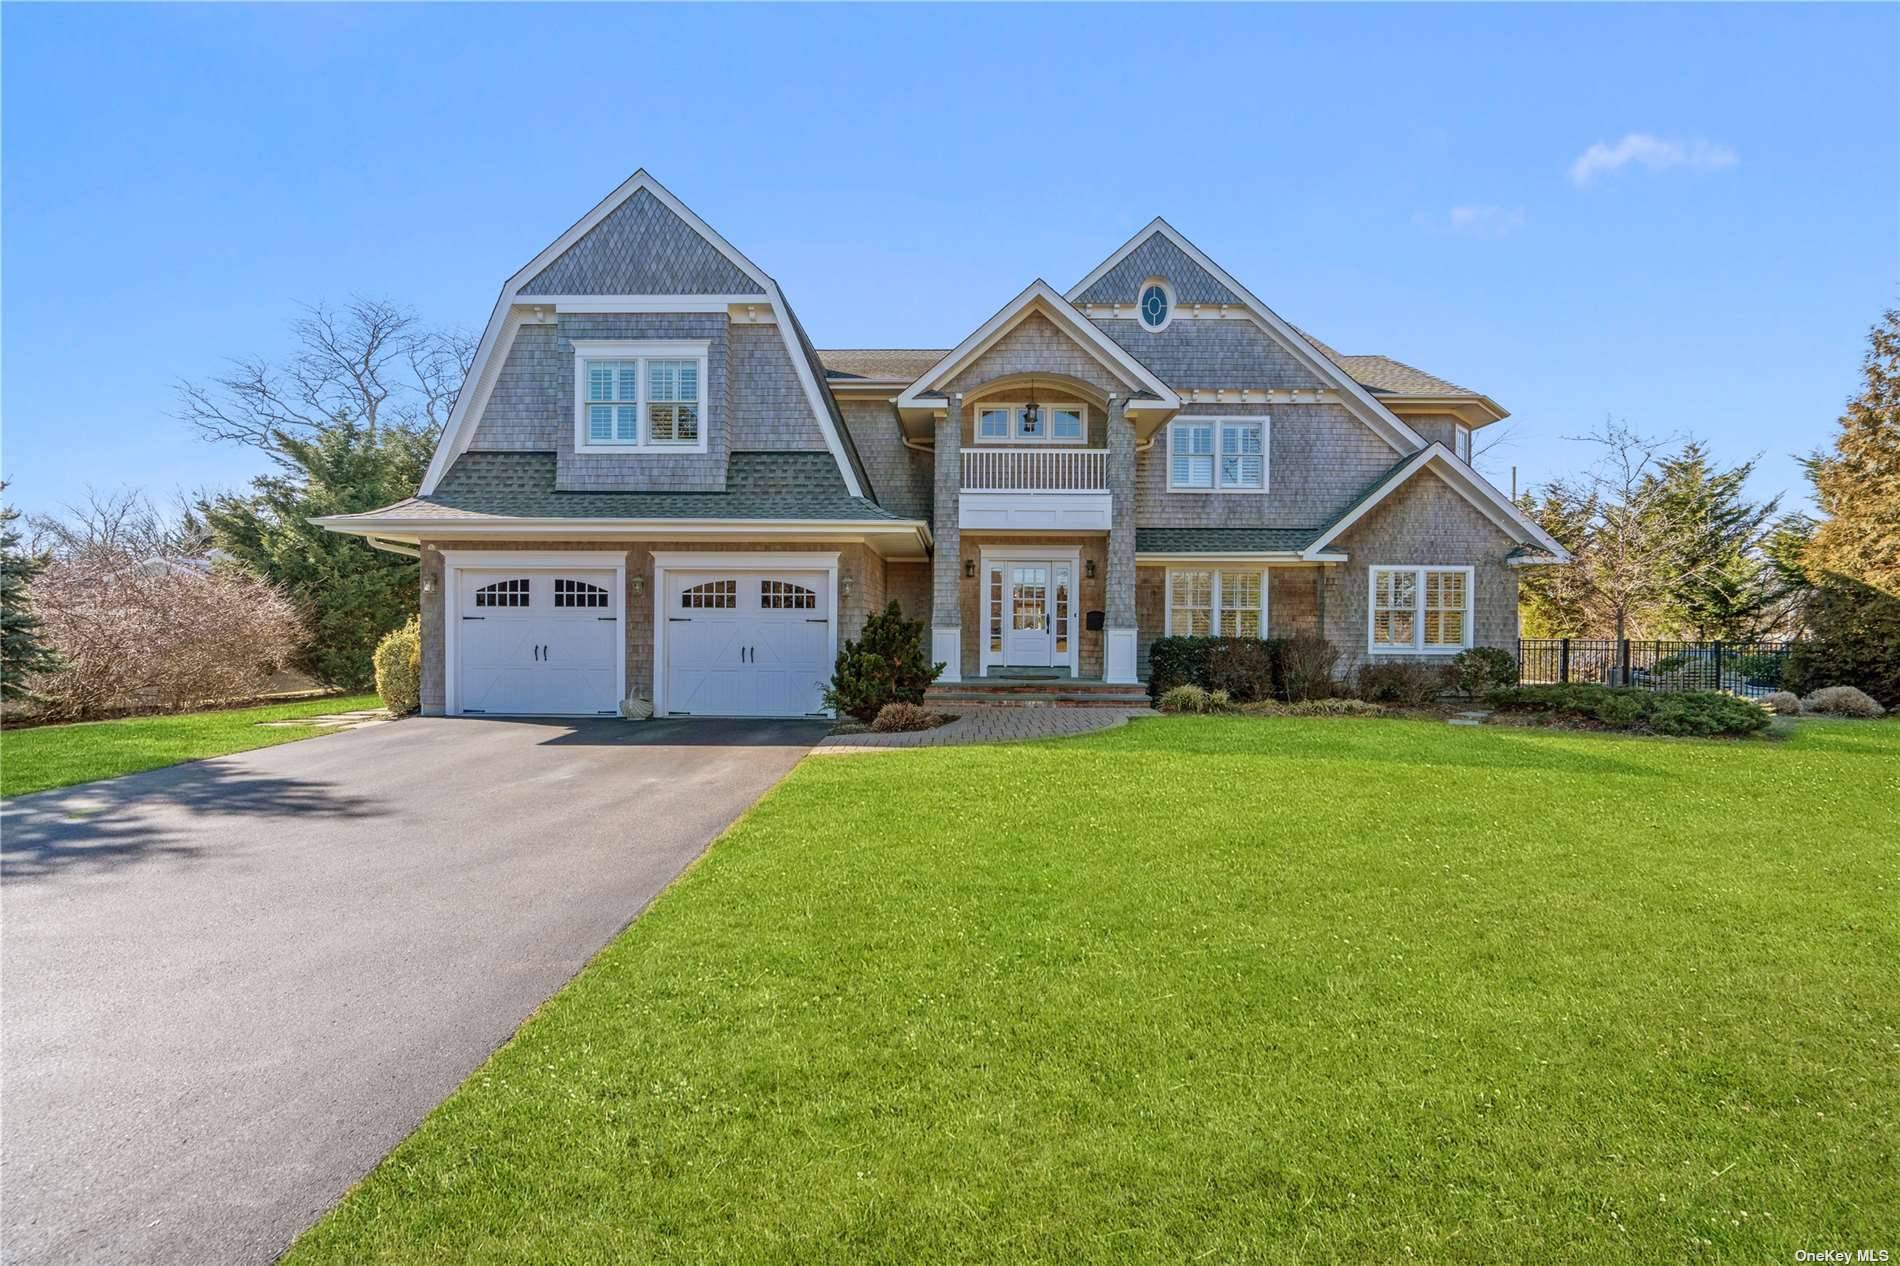 Introducing a captivating new waterfront home in West Islip.